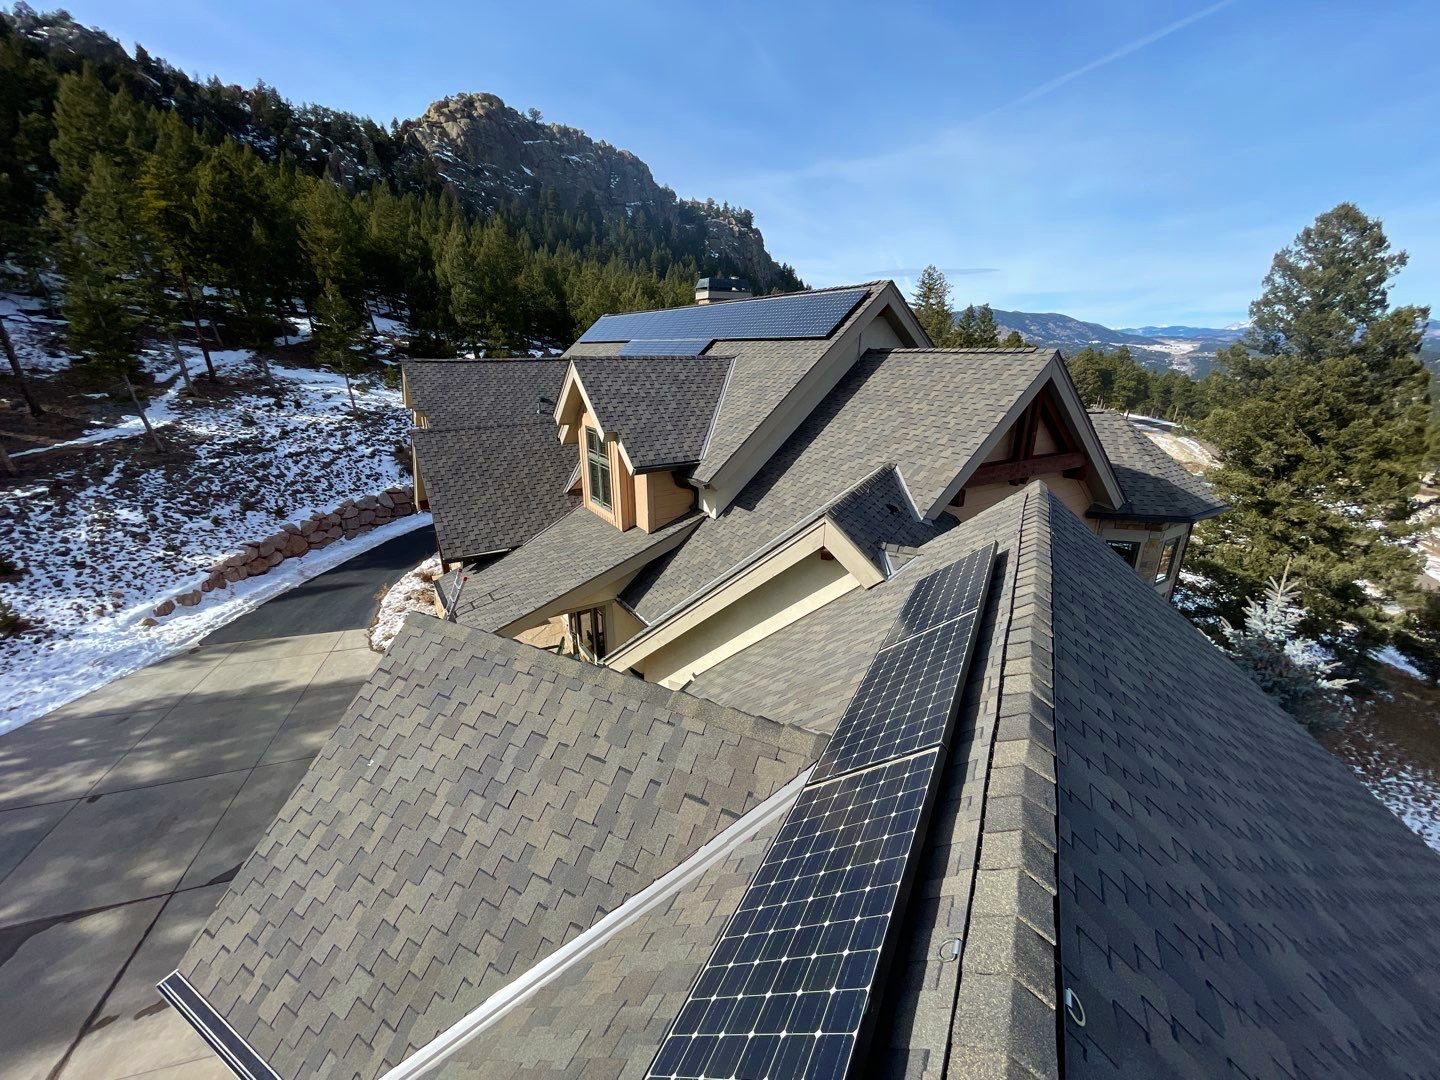 Mountain home with solar panels on roof during winter.